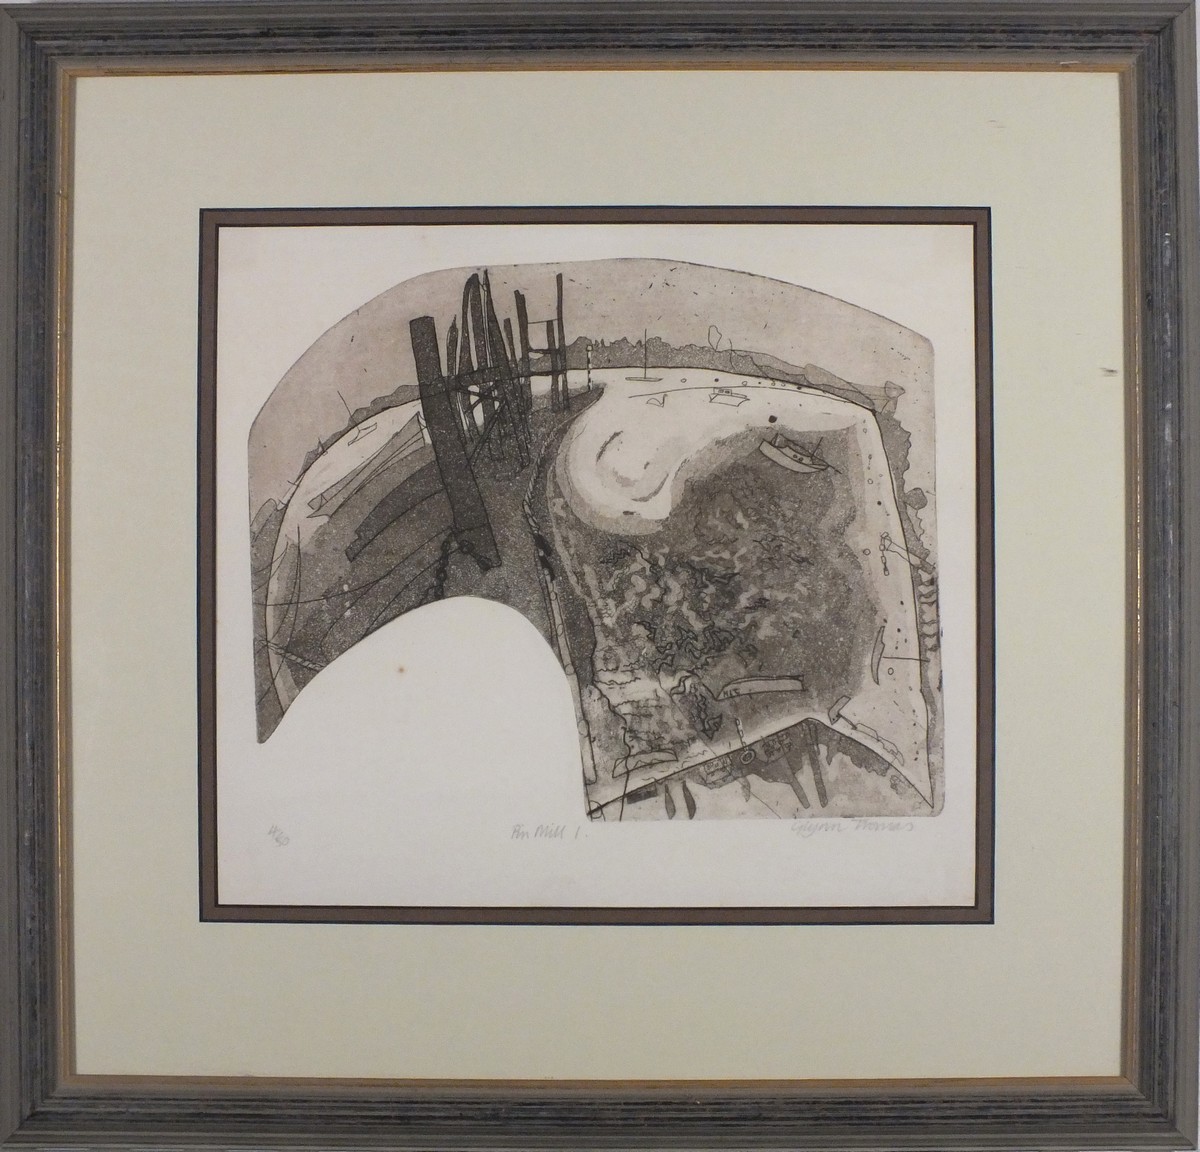 Glynn THOMAS (British b. 1946) Pin Mill I, Etching, Signed lower right, inscribed and numbered 4/50, - Image 2 of 3